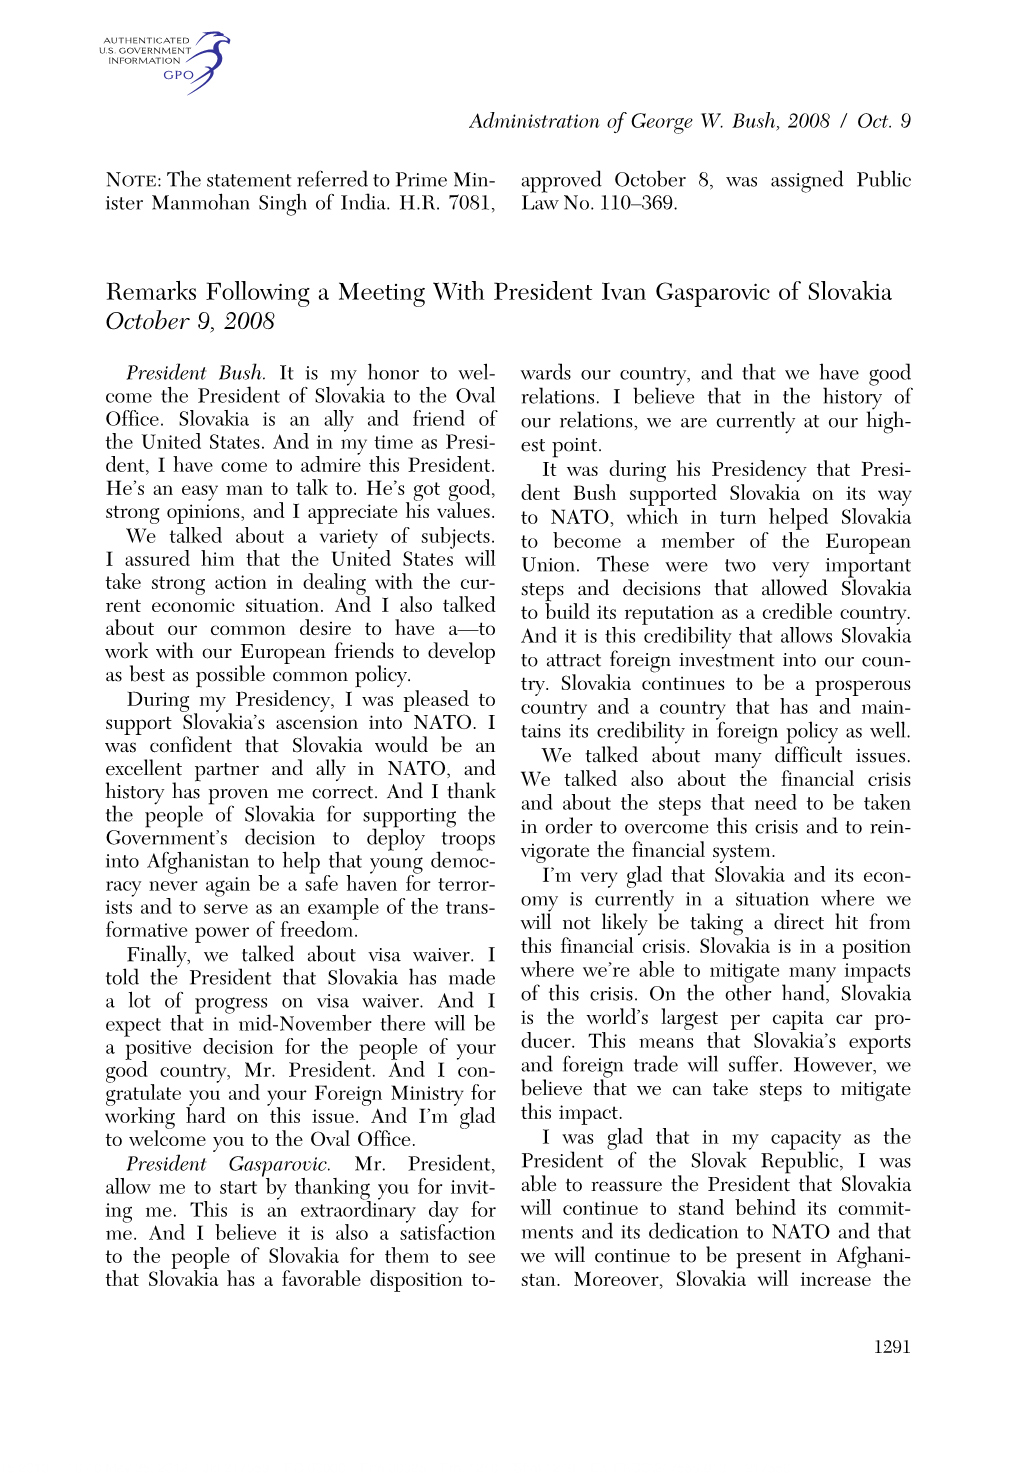 Remarks Following a Meeting with President Ivan Gasparovic of Slovakia October 9, 2008